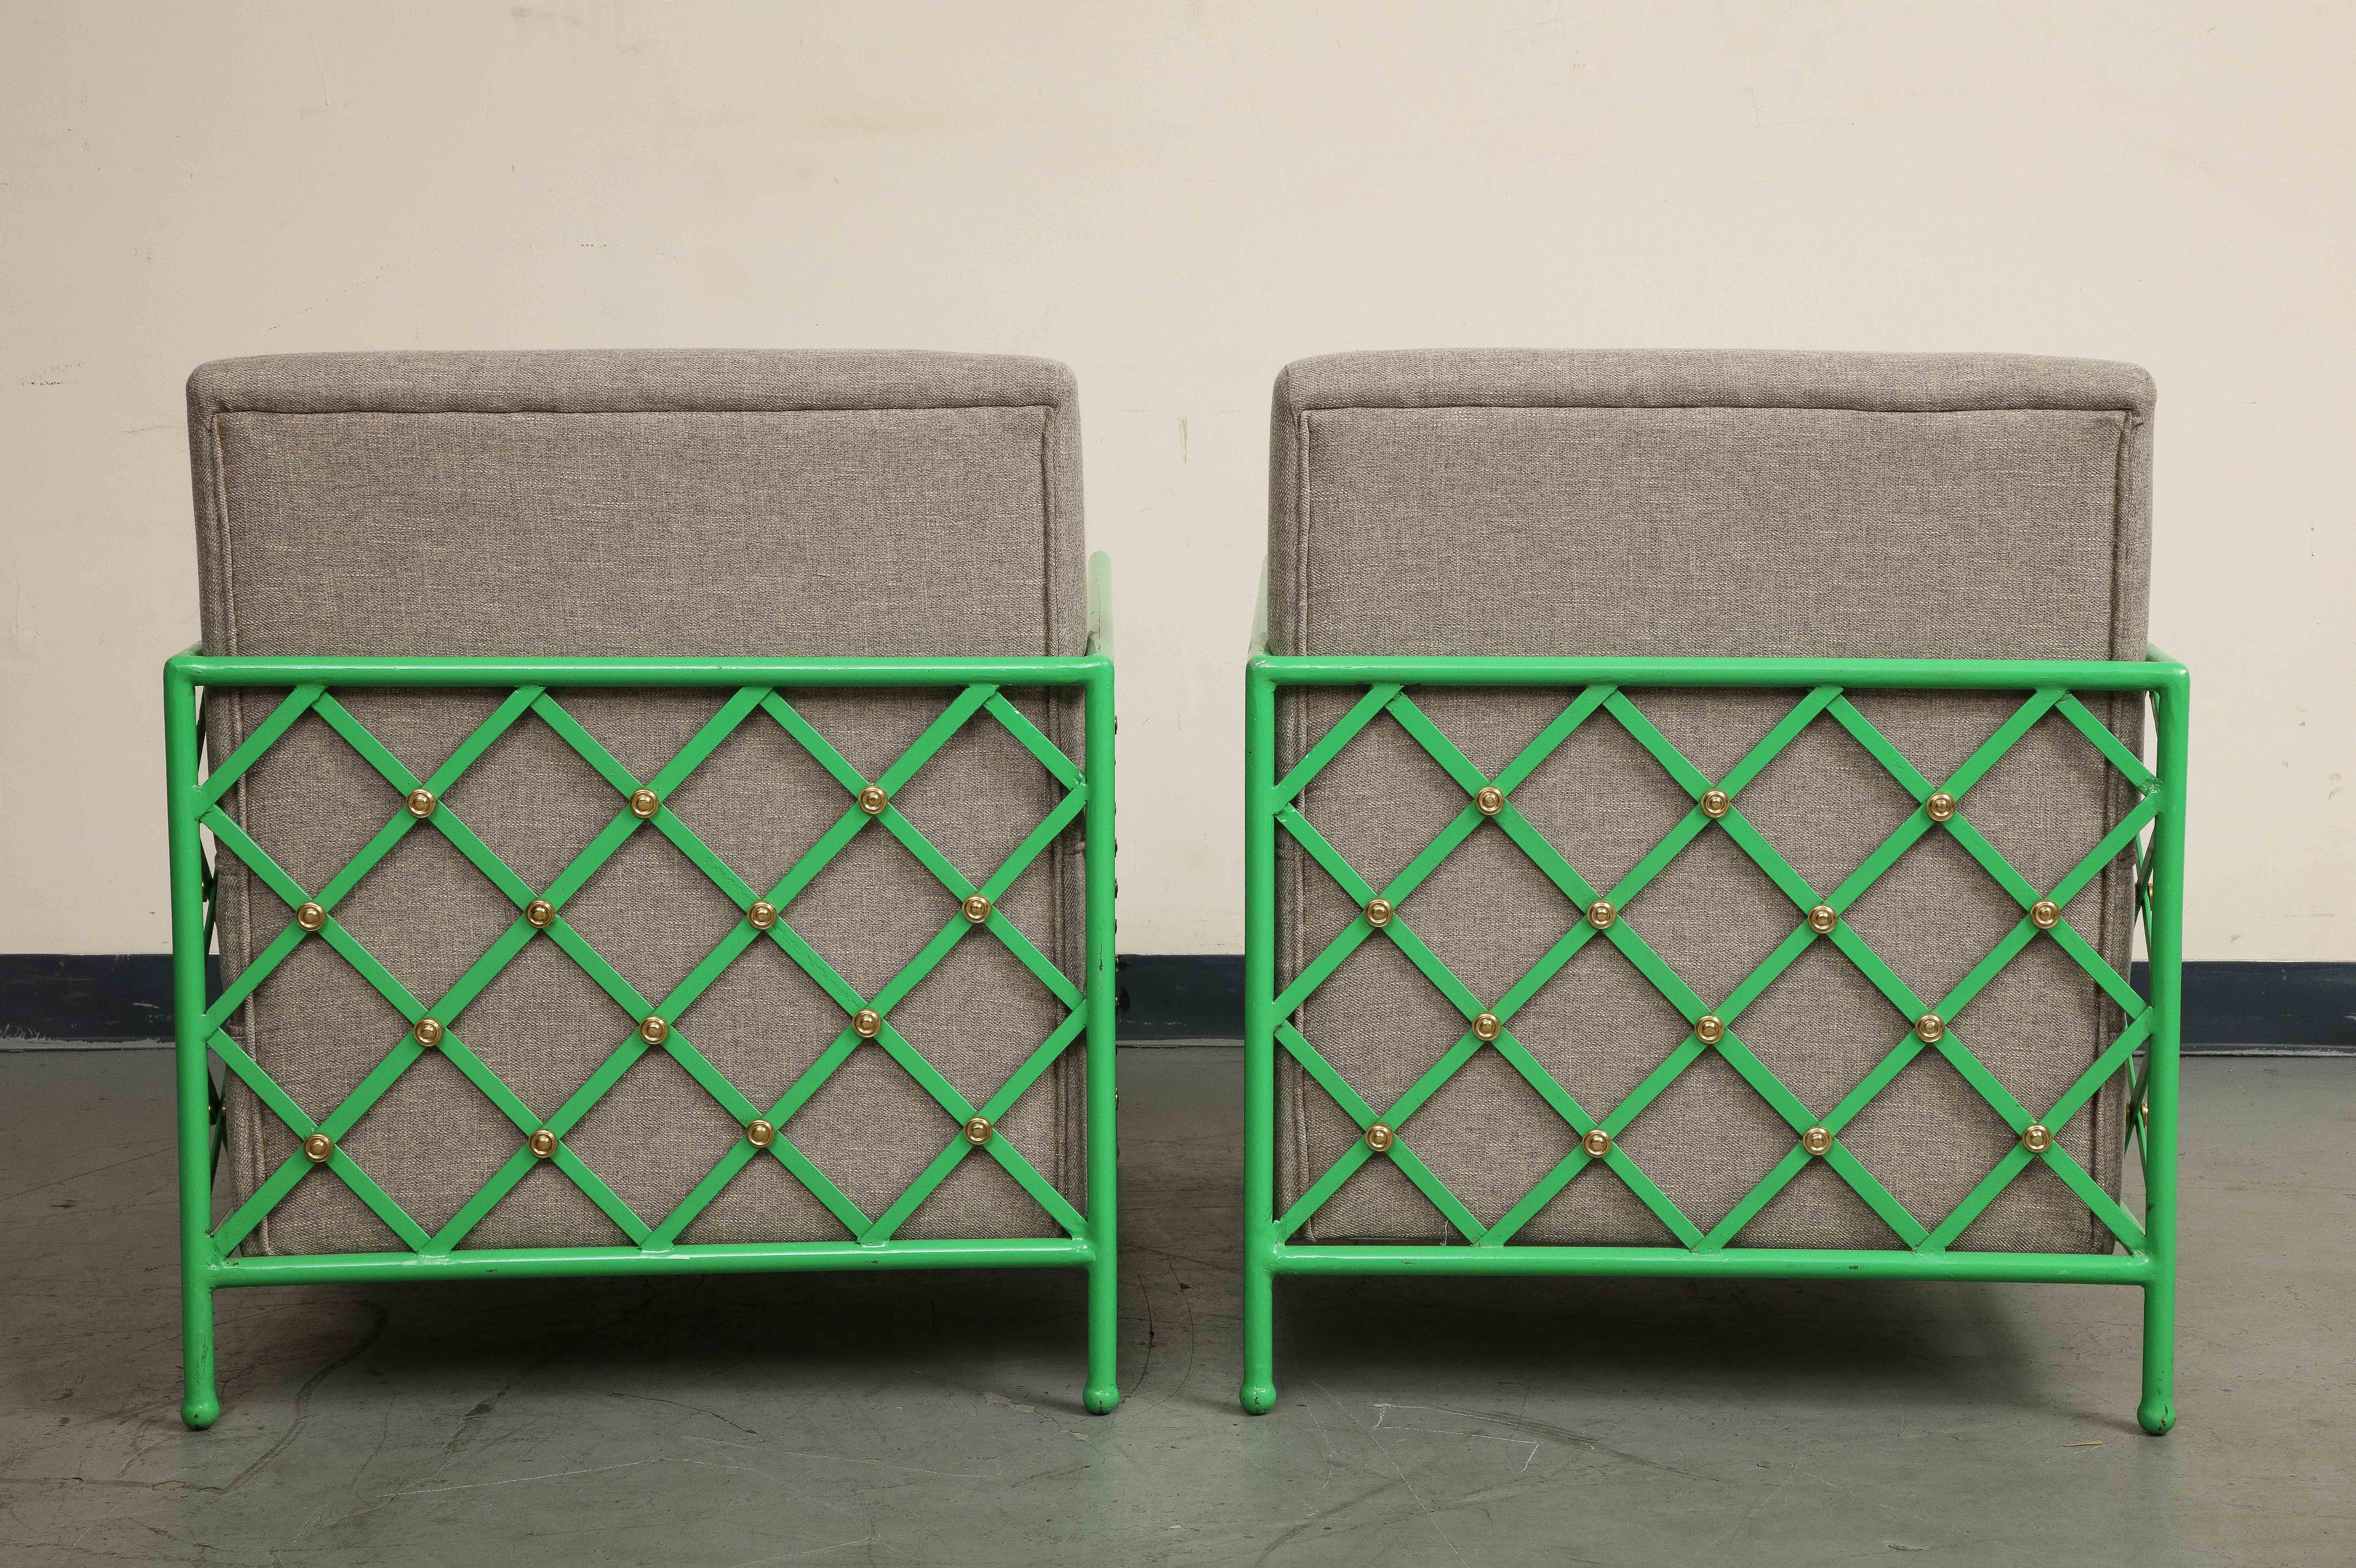 Pair of Midcentury French Style Bright Green Enameled Iron Cube Lounge Chairs For Sale 1